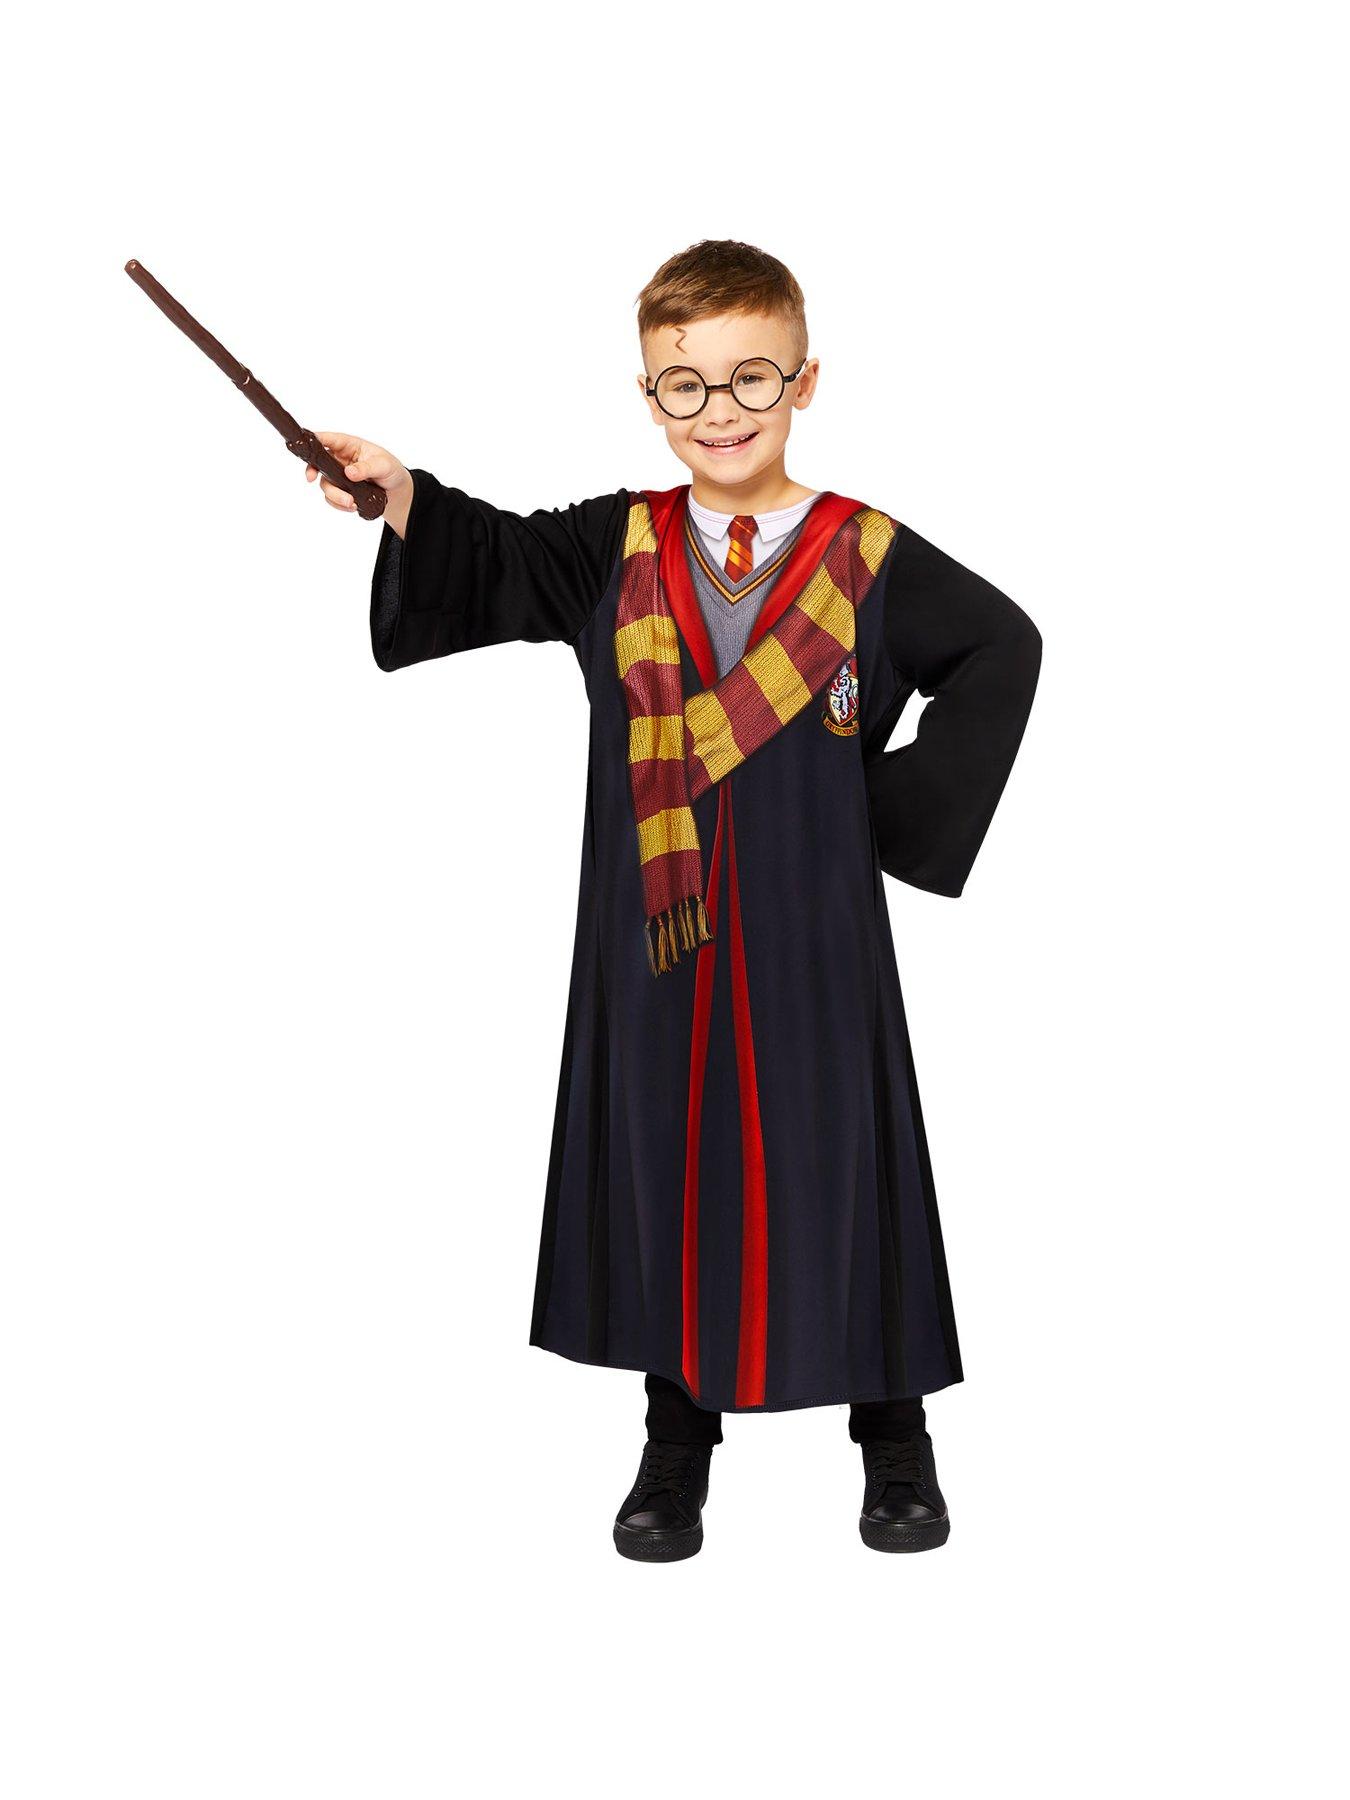 Hogwarts House Costumes & Accessories, Cedric Diggory Costume